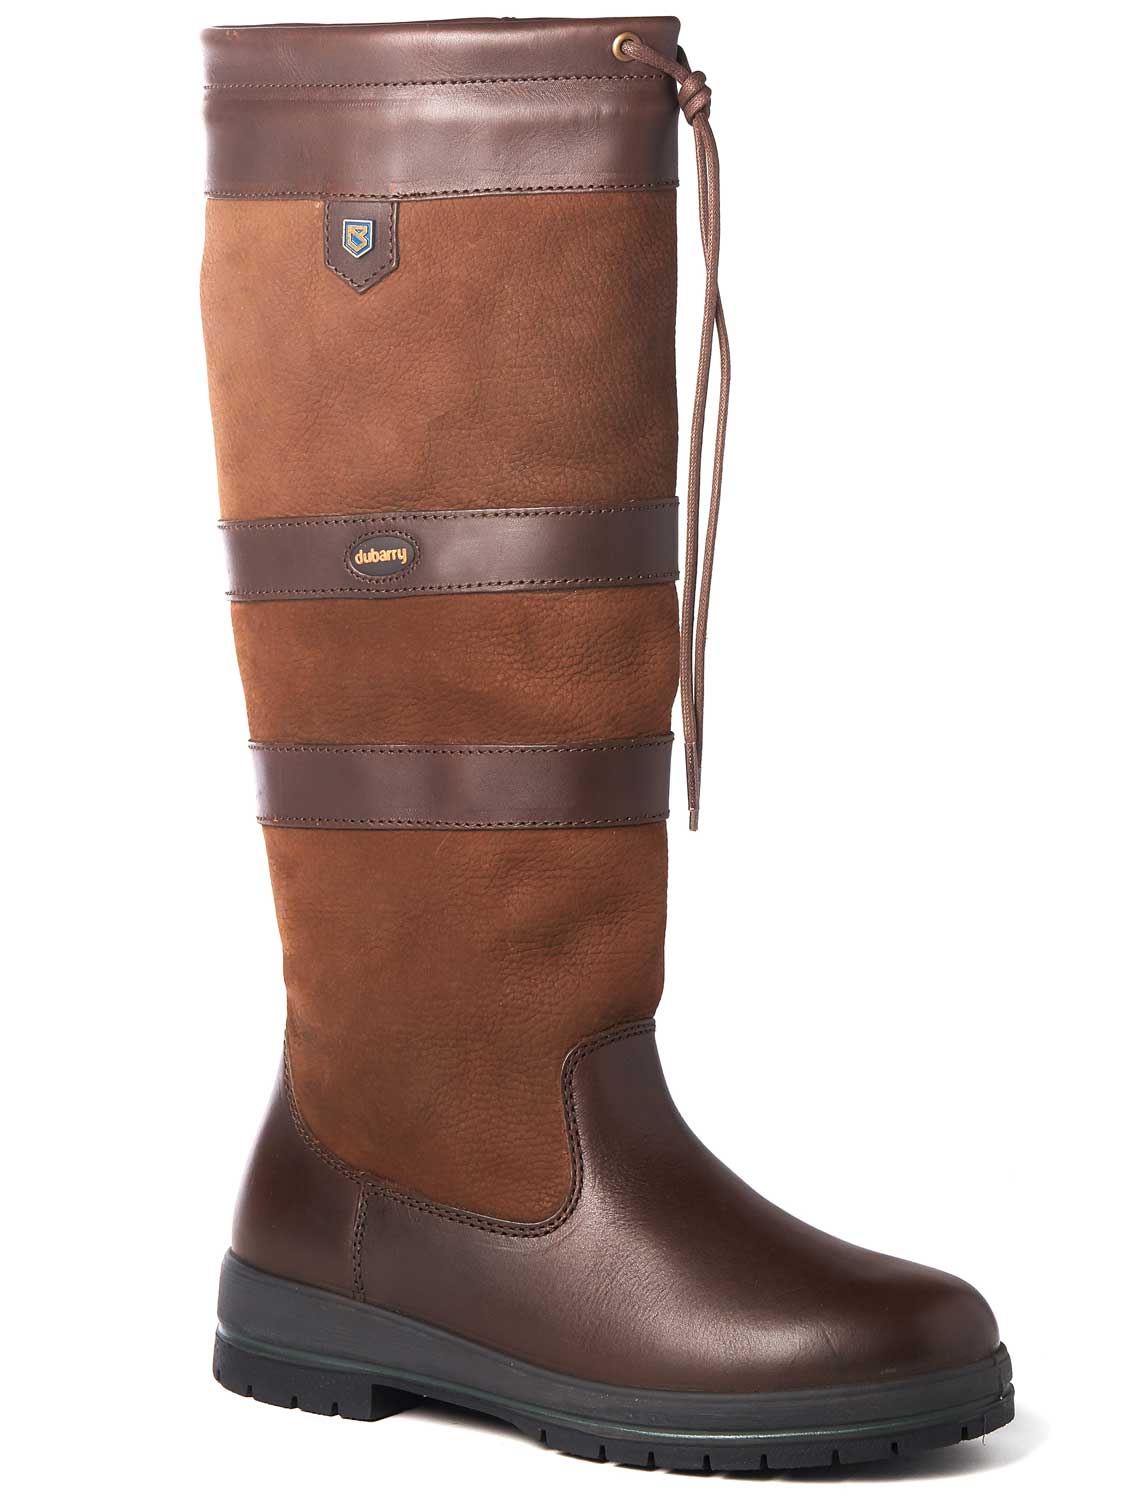 DUBARRY Galway Country Boots - Walnut